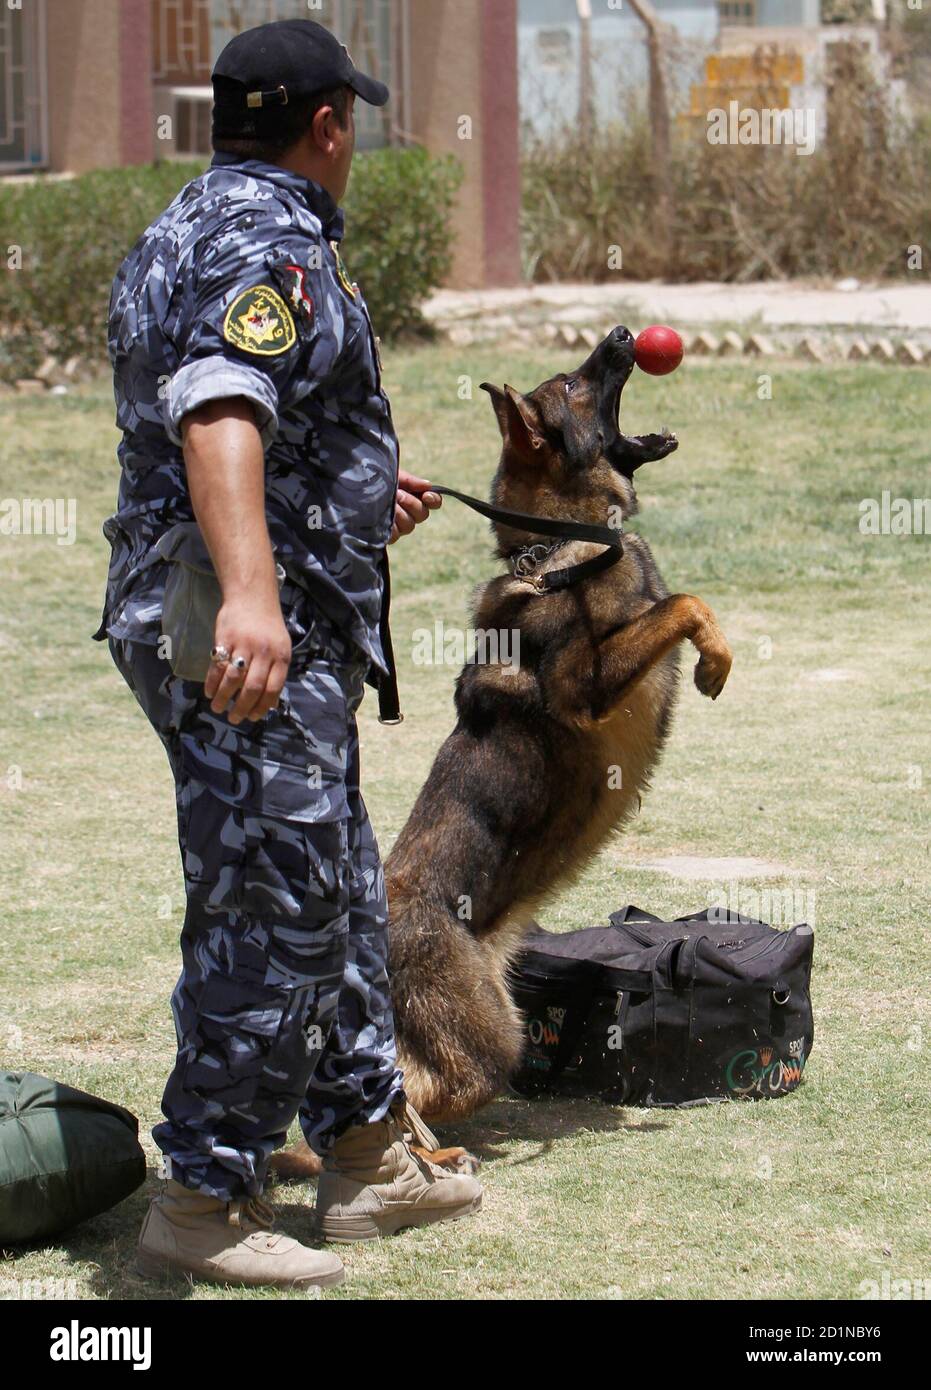 A policeman trains his dog at a police academy in Baghdad June 27, 2010. At  Baghdad's police training college, some of the 12 Alsatians and other  breeds now deployed as bomb sniffers